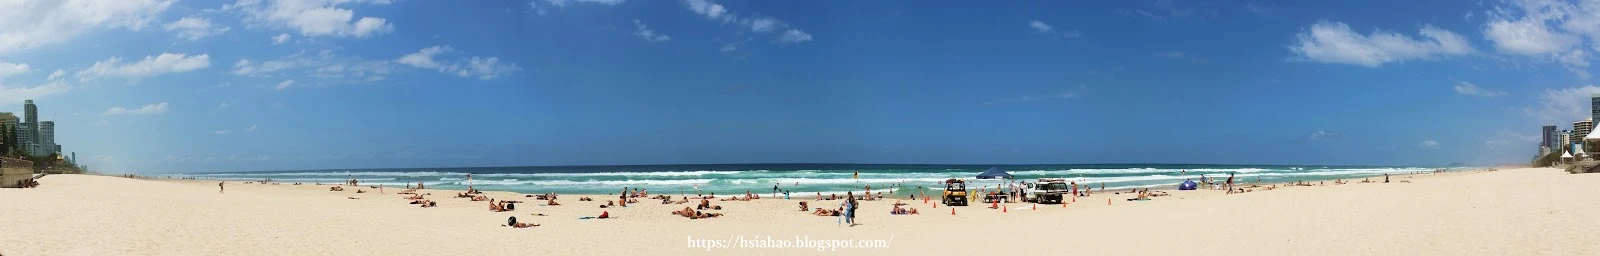 Gold-Coast-Surfers-Paradise-best-top-beaches-attractions-food-Broadbeach-Burleigh-Heads-things to do-places-travel-Queensland-Australia